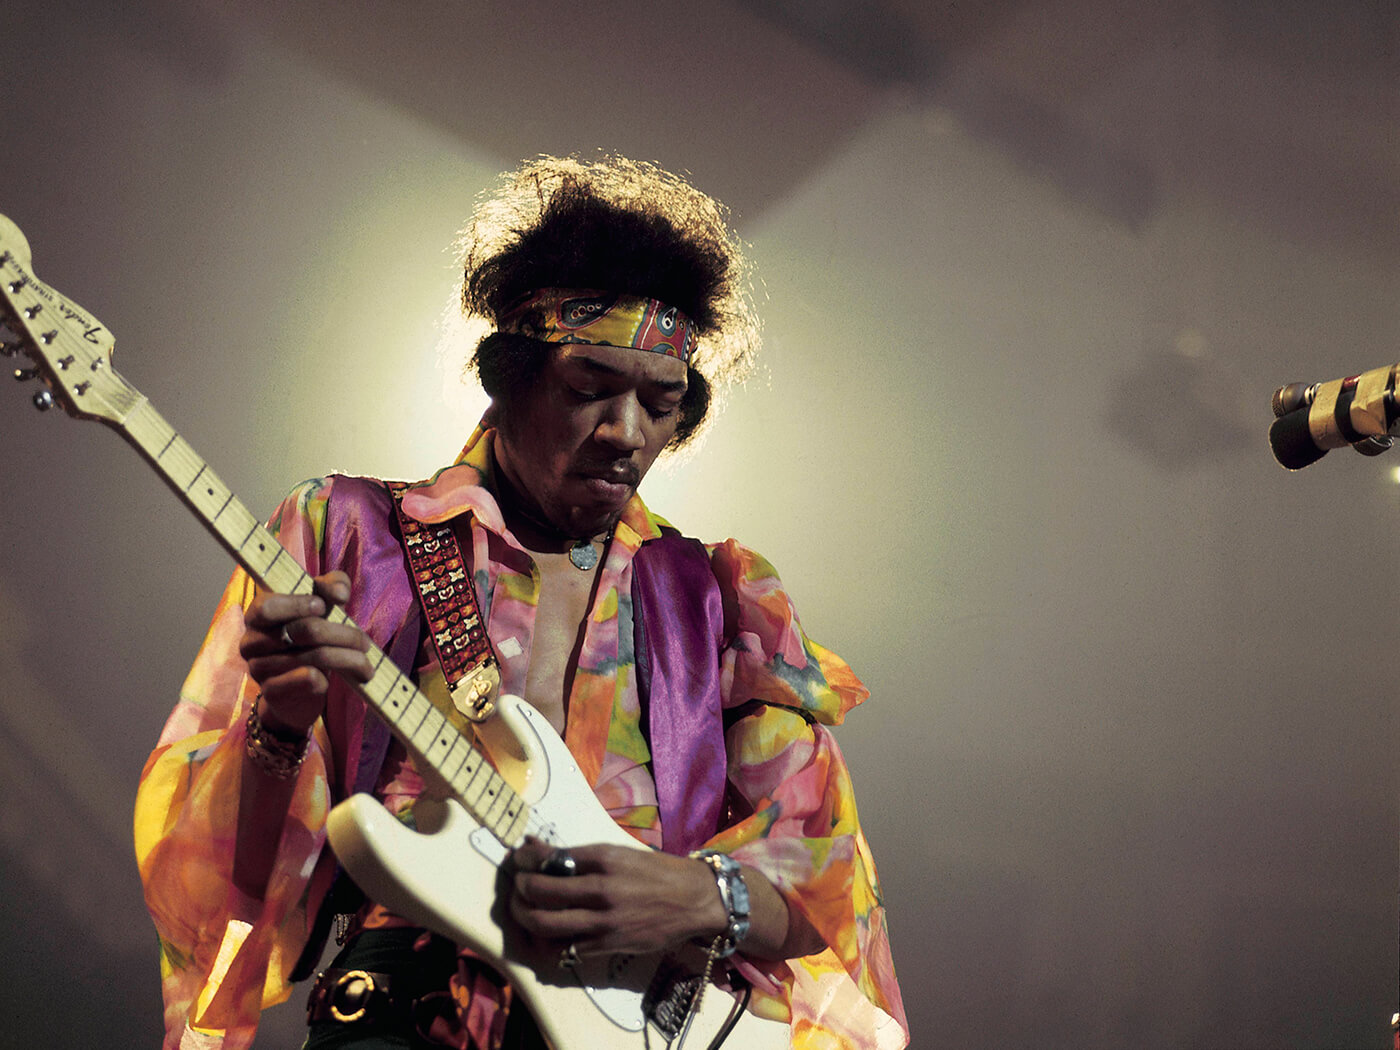 Jimi Hendrix playing a white Fender Stratocaster on stage